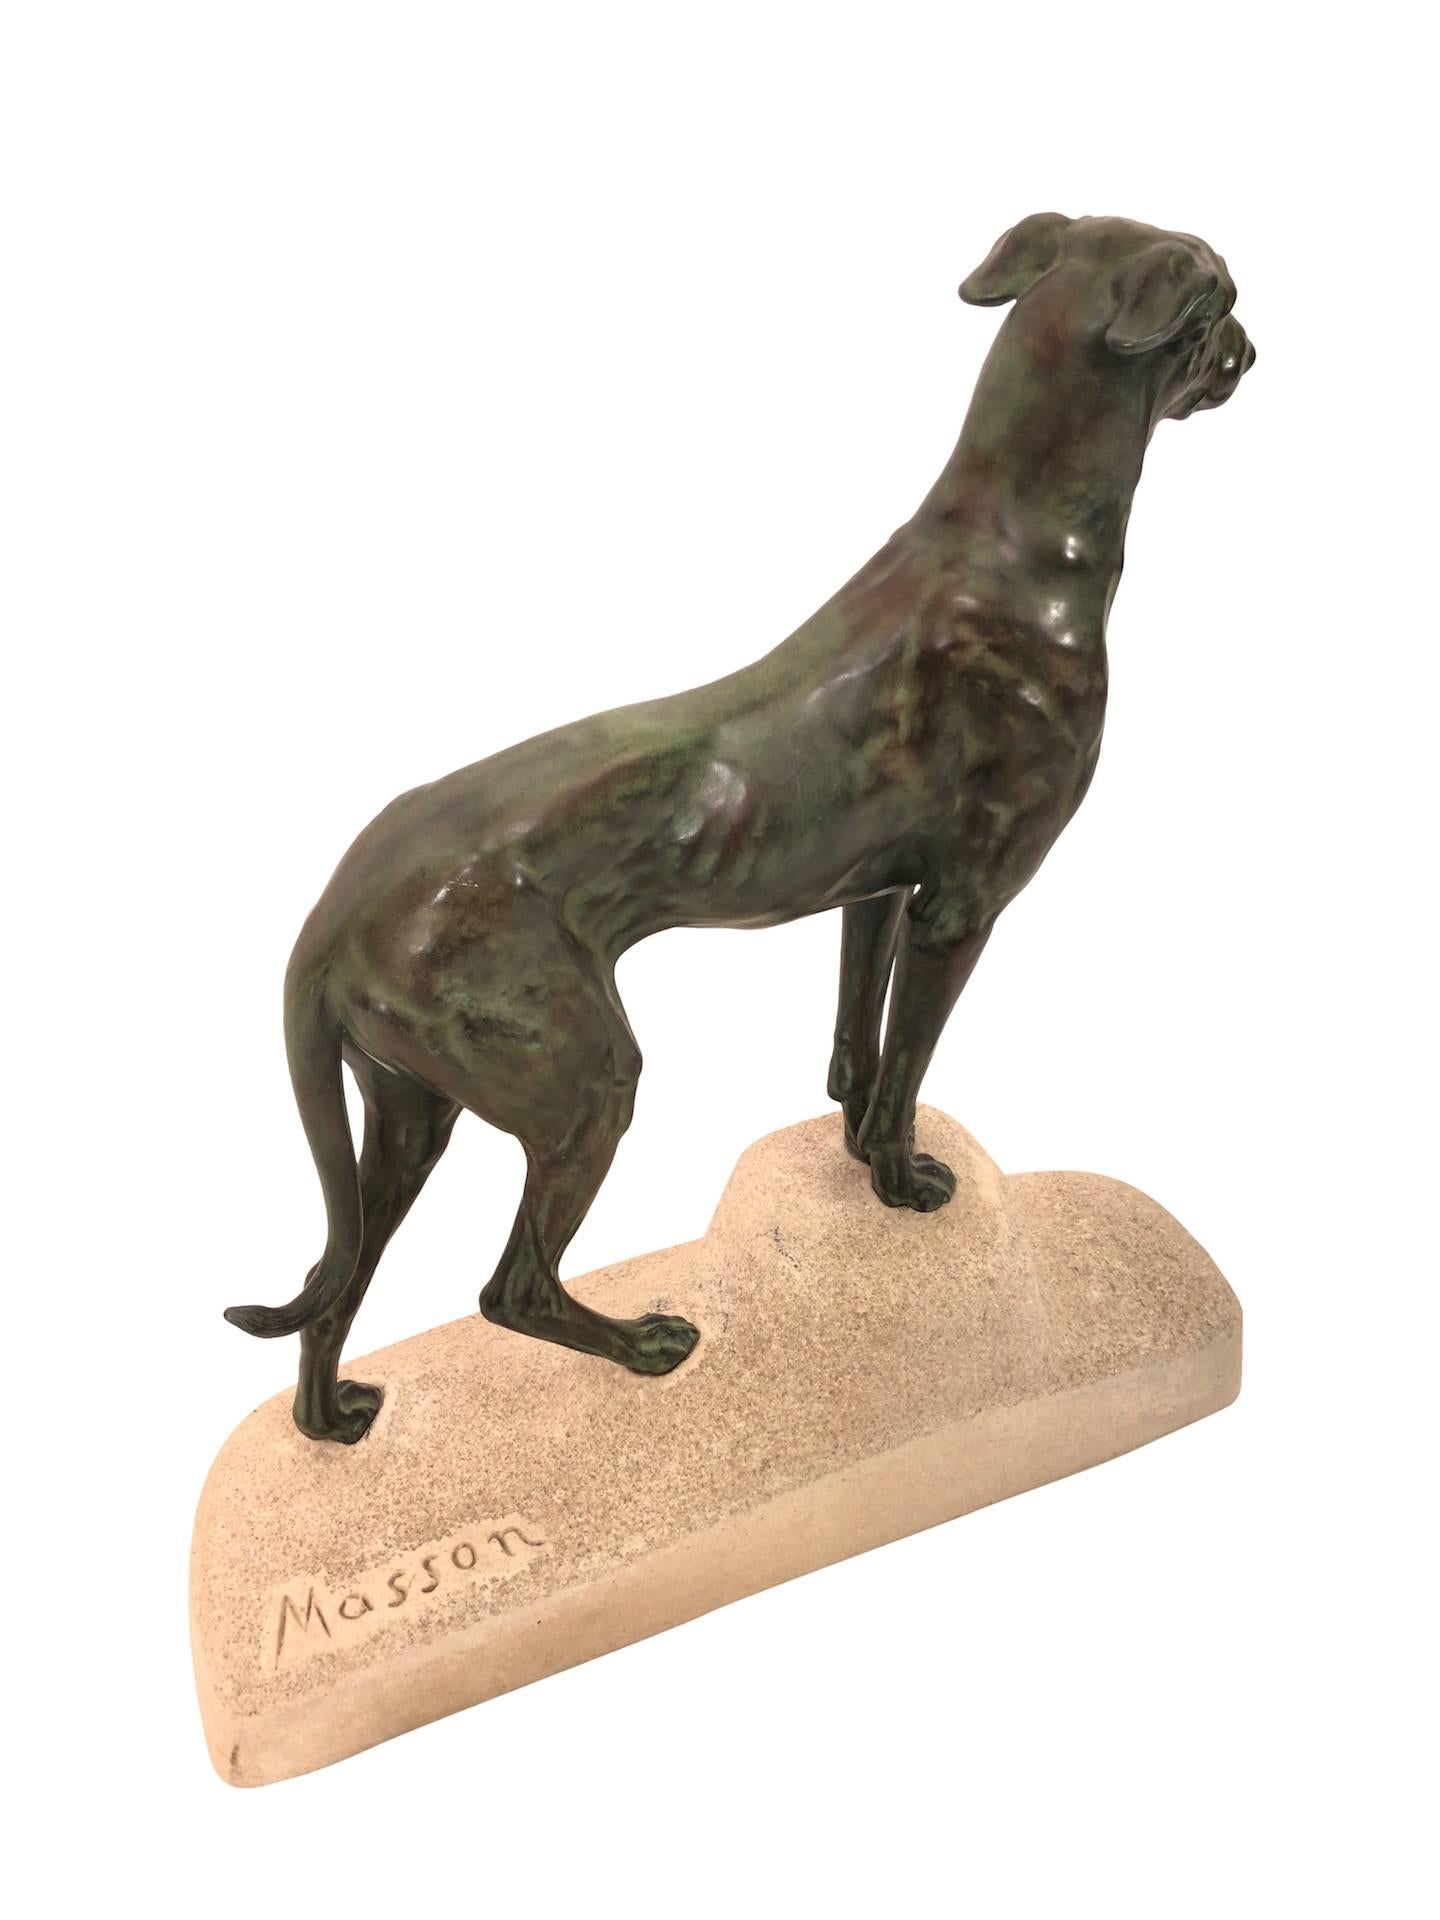 French Impressive Max Le Verrier Art Deco Greyhound Sculpture Sloughi by Masson